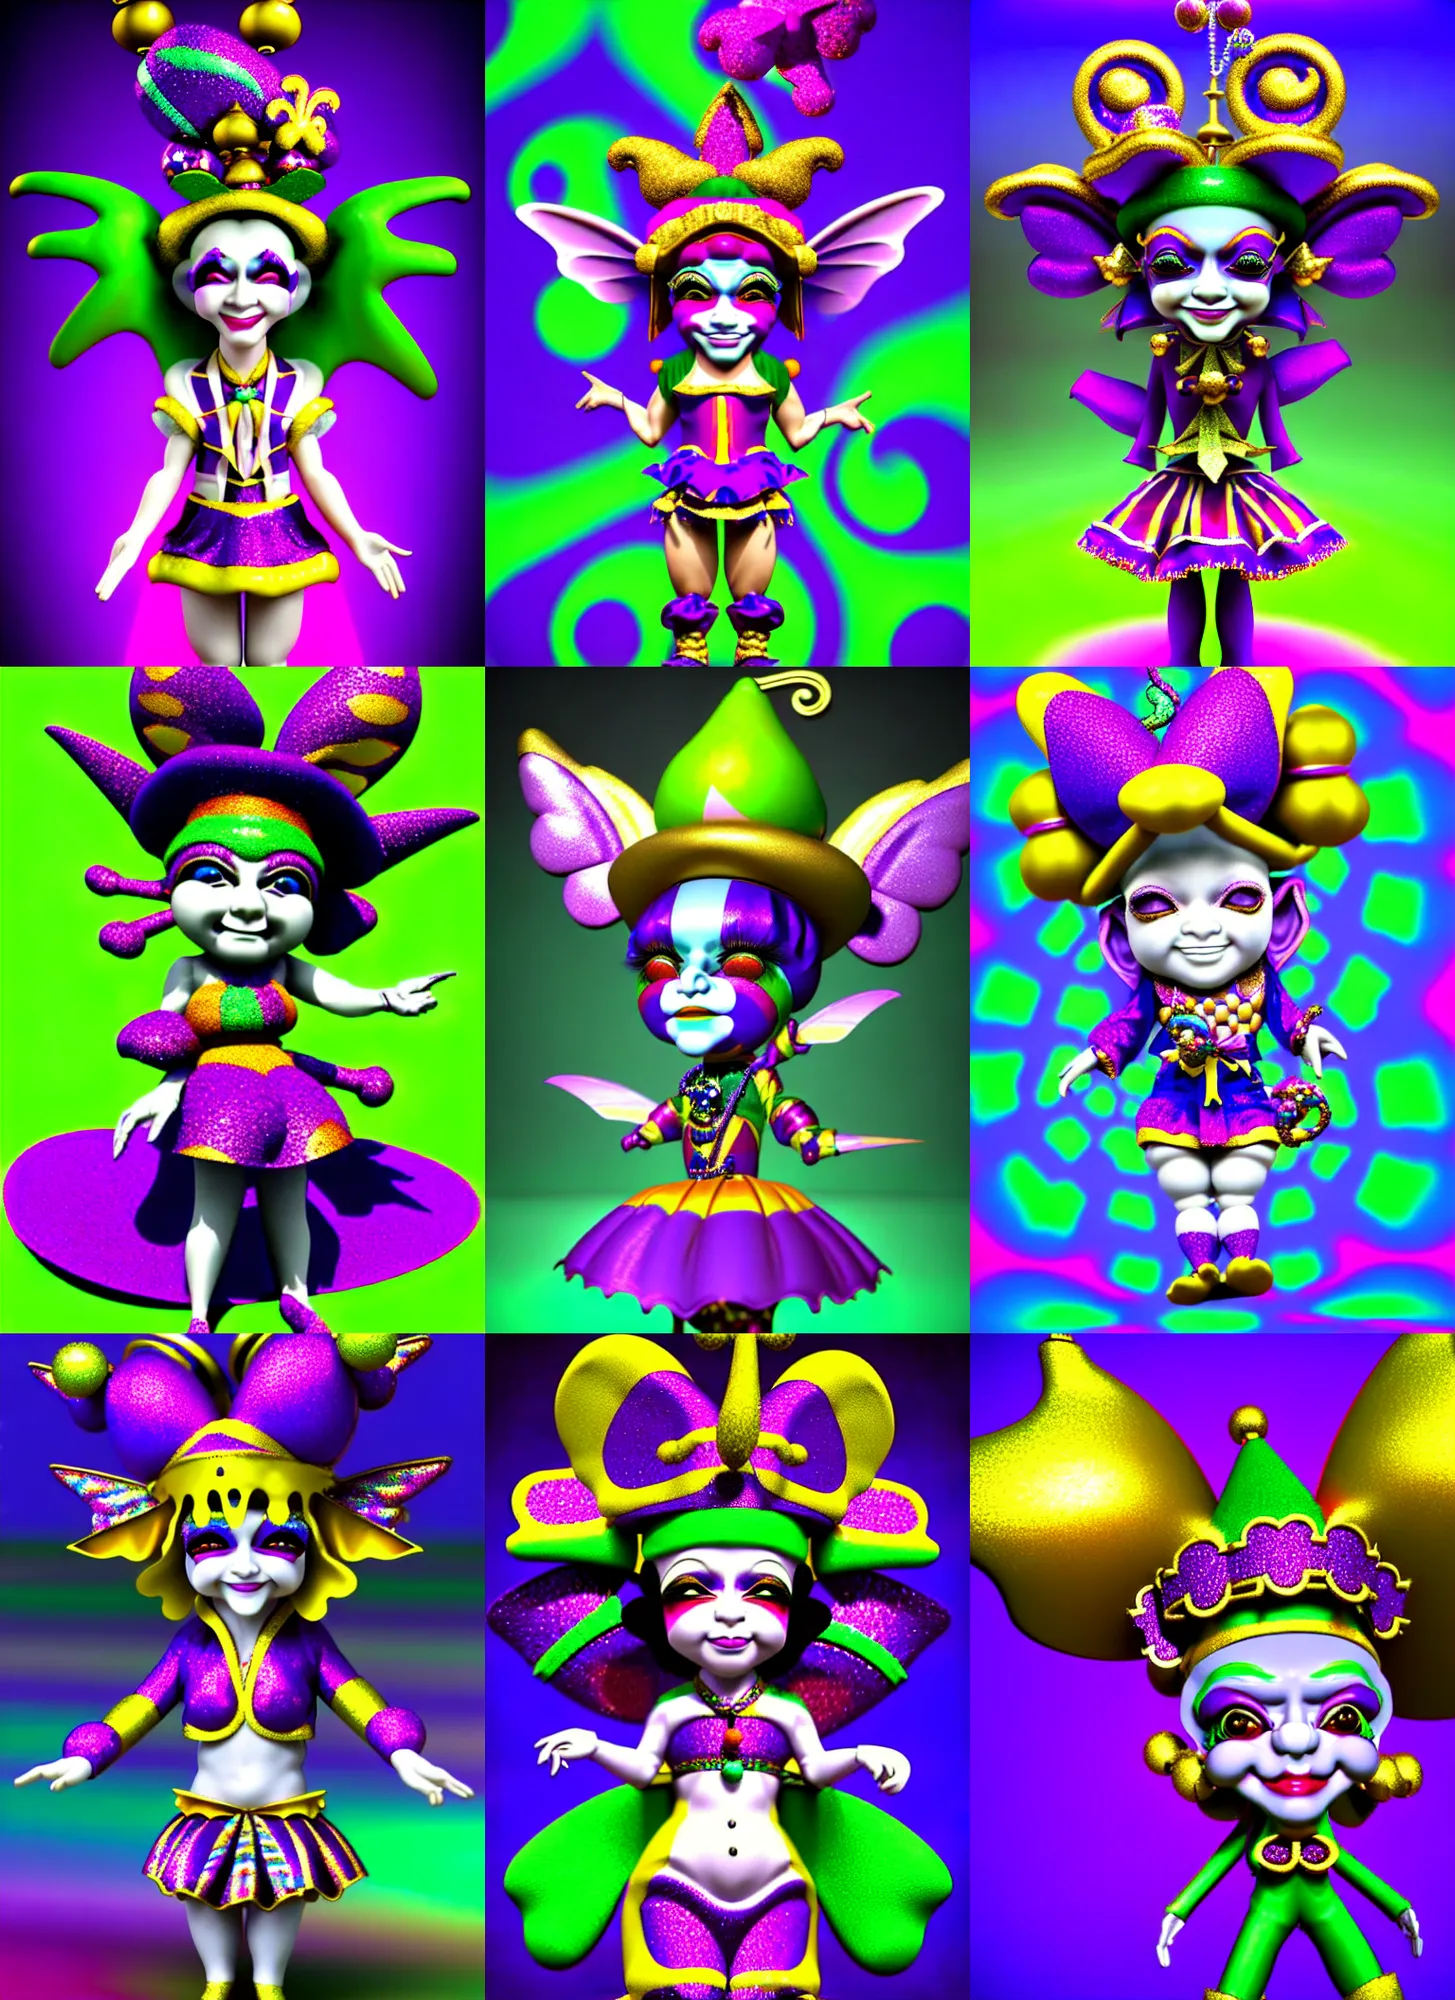 Prompt: 3d render of chibi mardi gras jester doll by Ichiro Tanida wearing a jester cap and bells and wearing angel wings against a psychedelic swirly background with 3d butterflies and 3d flowers n the style of 1990's CG graphics 3d rendered y2K aesthetic by Ichiro Tanida, 3DO magazine